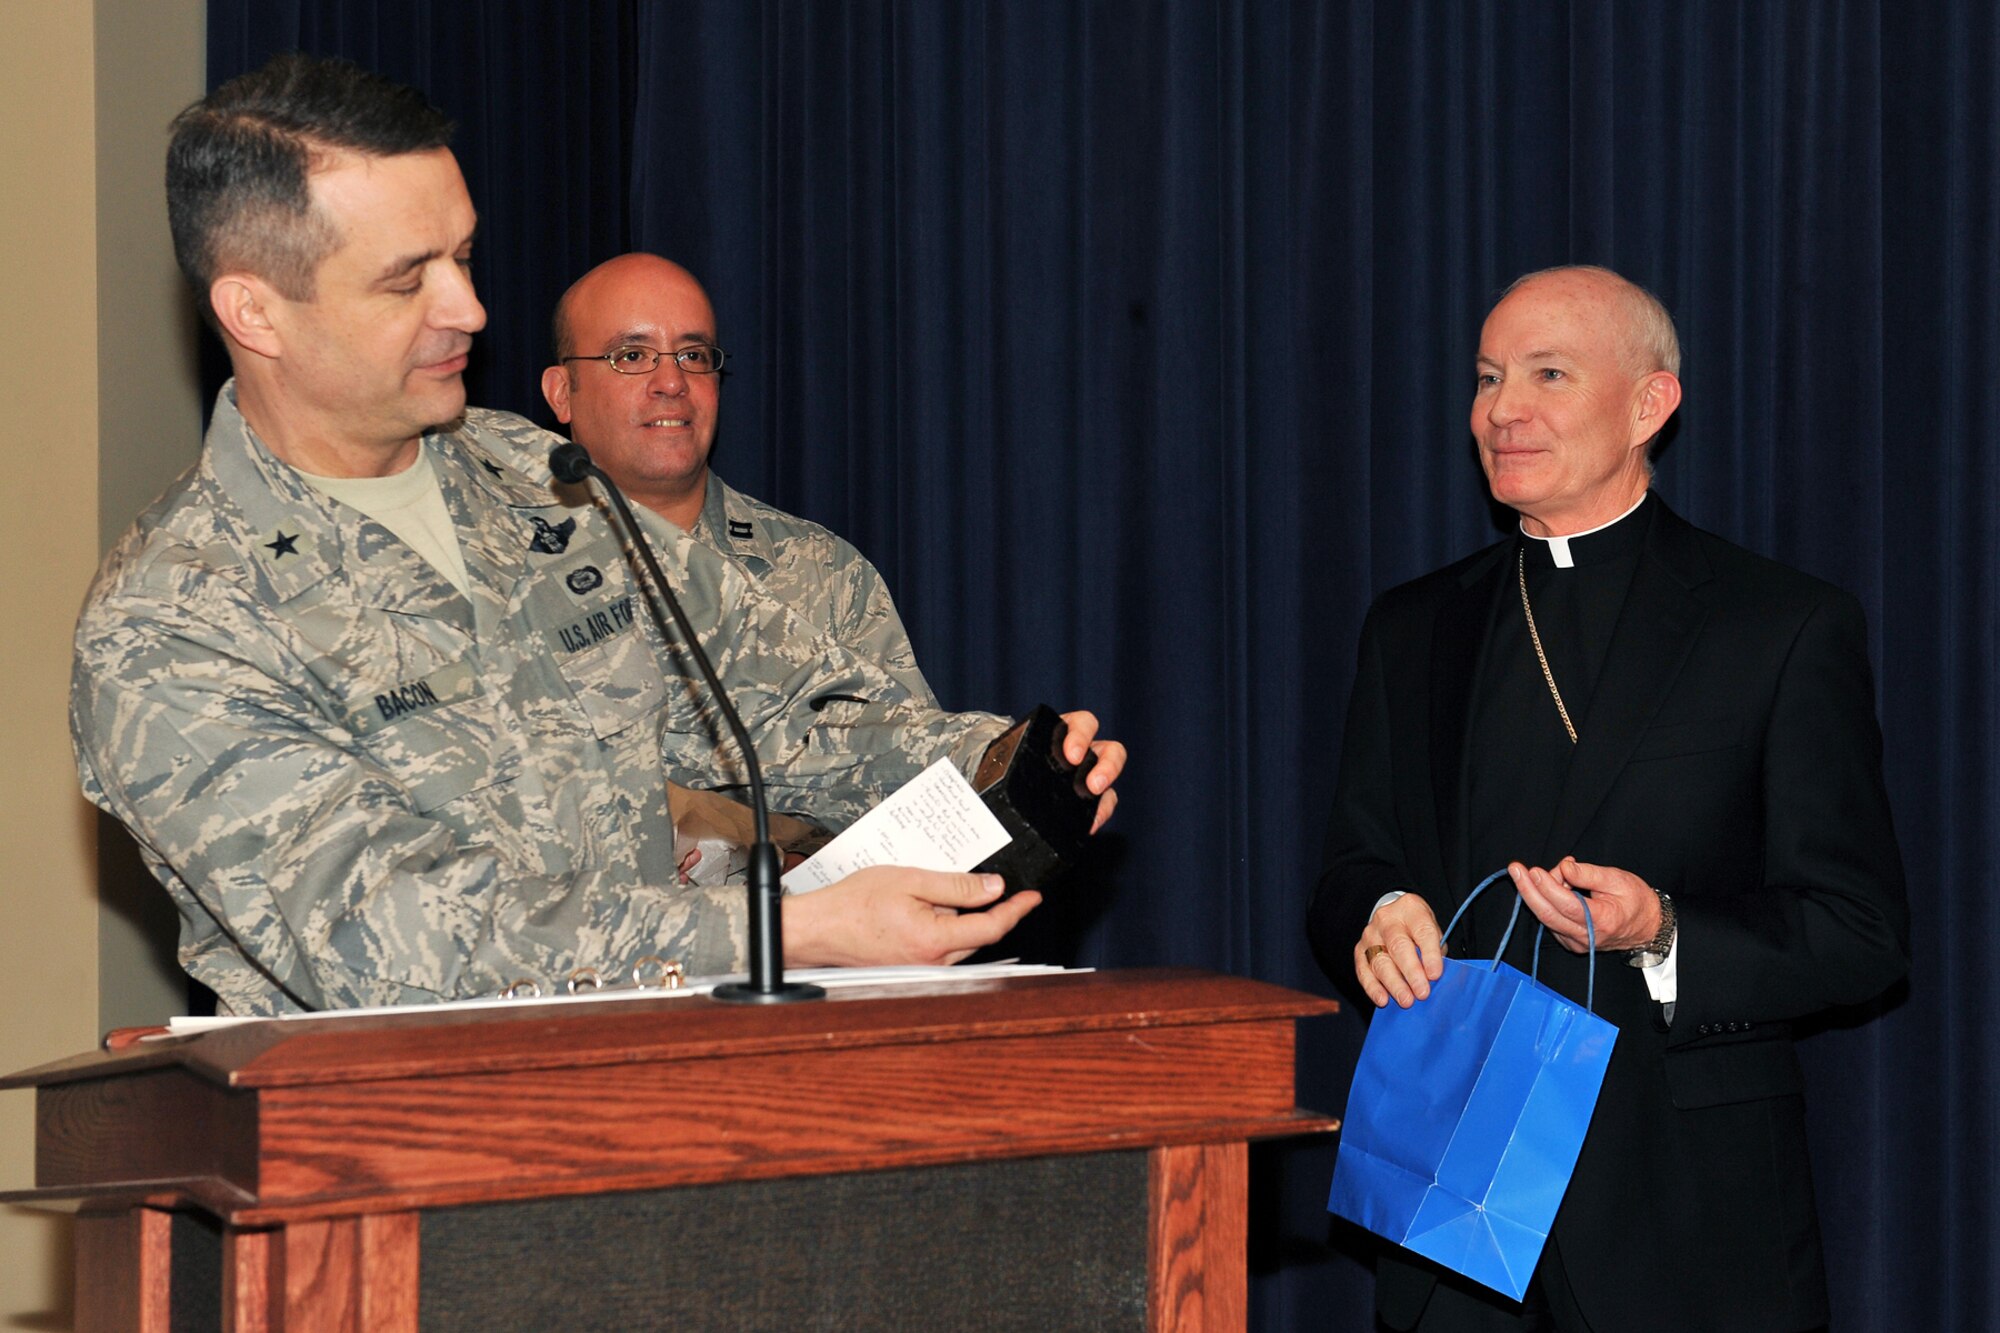 OFFUTT AIR FORCE BASE, Neb. - Brig. Gen. Donald Bacon, 55th Wing commander, presents a gift to George Lucas, Archbishop of Omaha, during the national prayer luncheon inside the Patriot Club March 10. Throughout this luncheon many of Offutt's personnel representing different faiths and backgrounds came together to pray for warriors fighting for our nation and our families. U.S. Air Force Photo by Charles Haymond